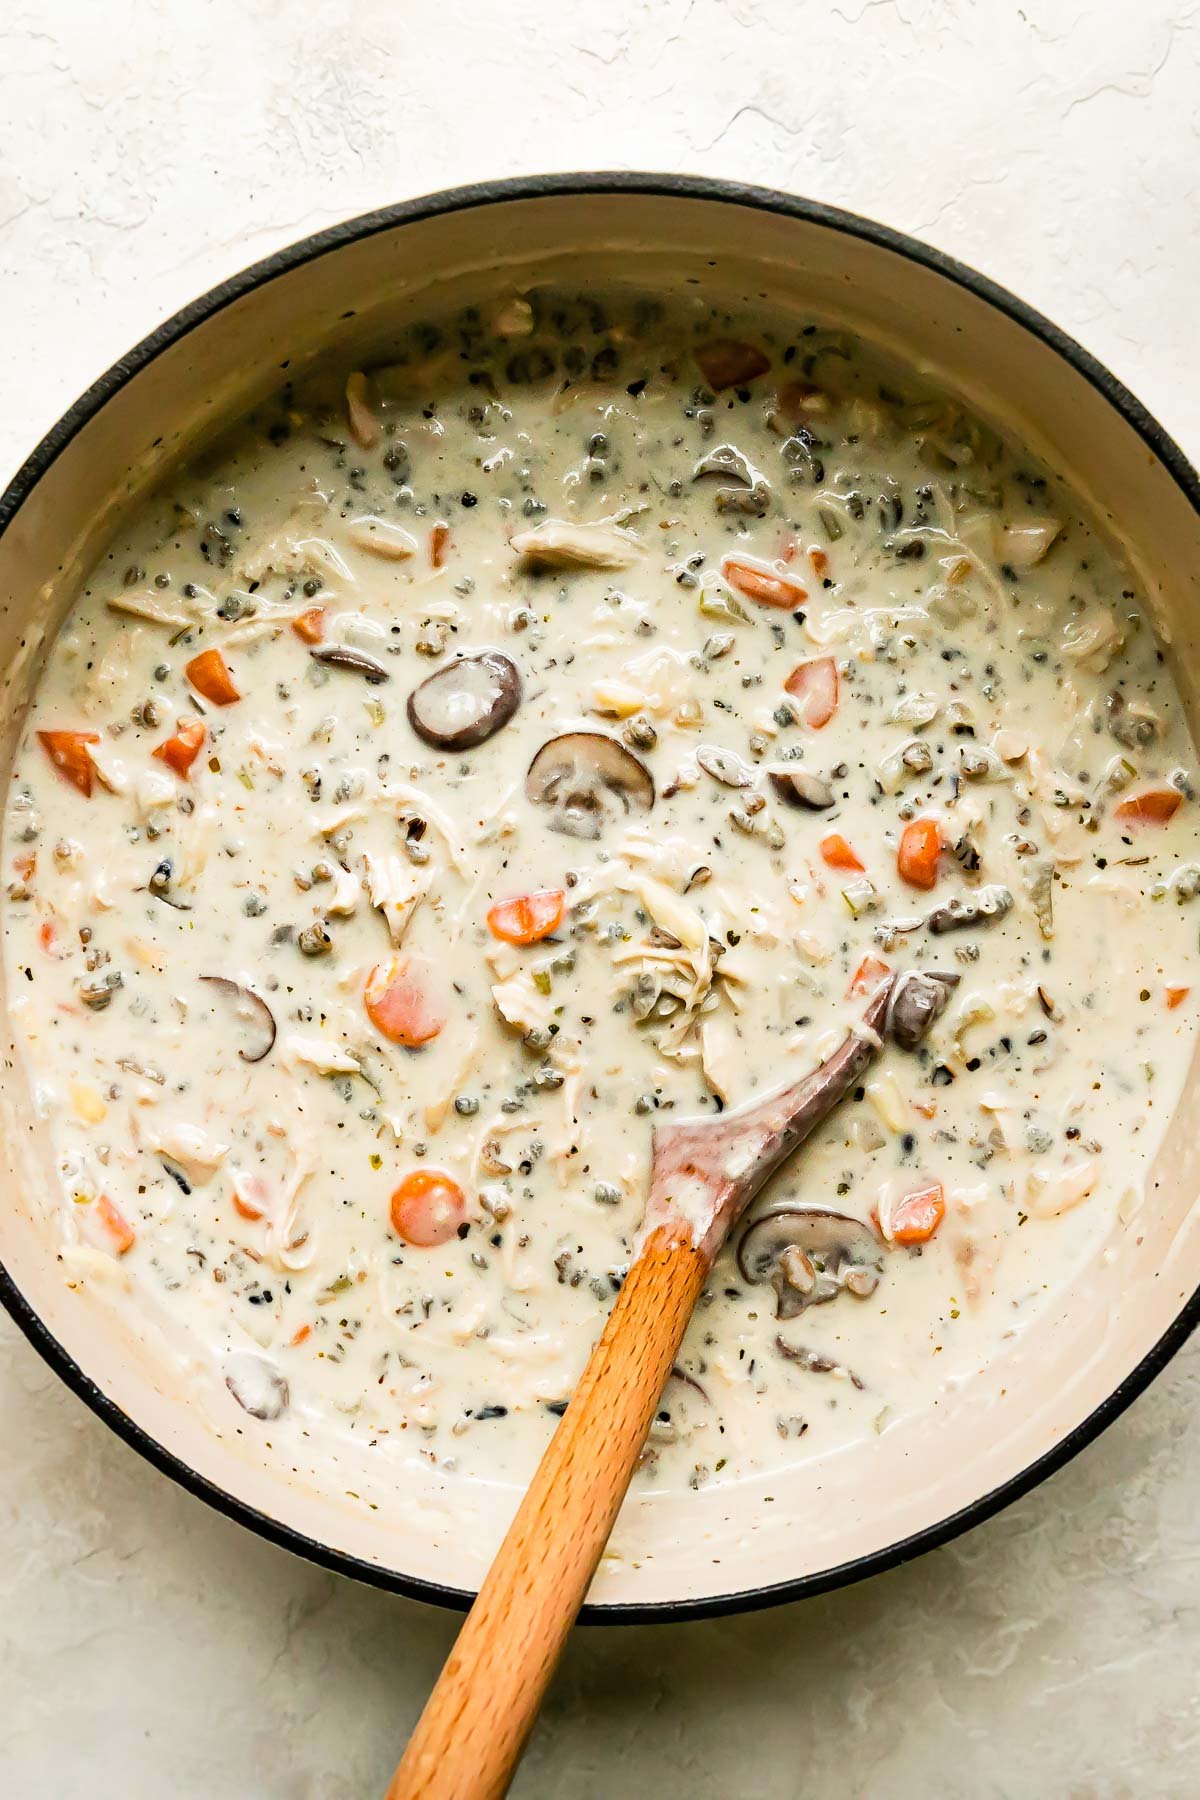 Finished creamy chicken and wild rice soup fills a large heavy-bottomed pot that sits atop a creamy white textured surface. A wooden spoon rests inside of the pot for stirring.